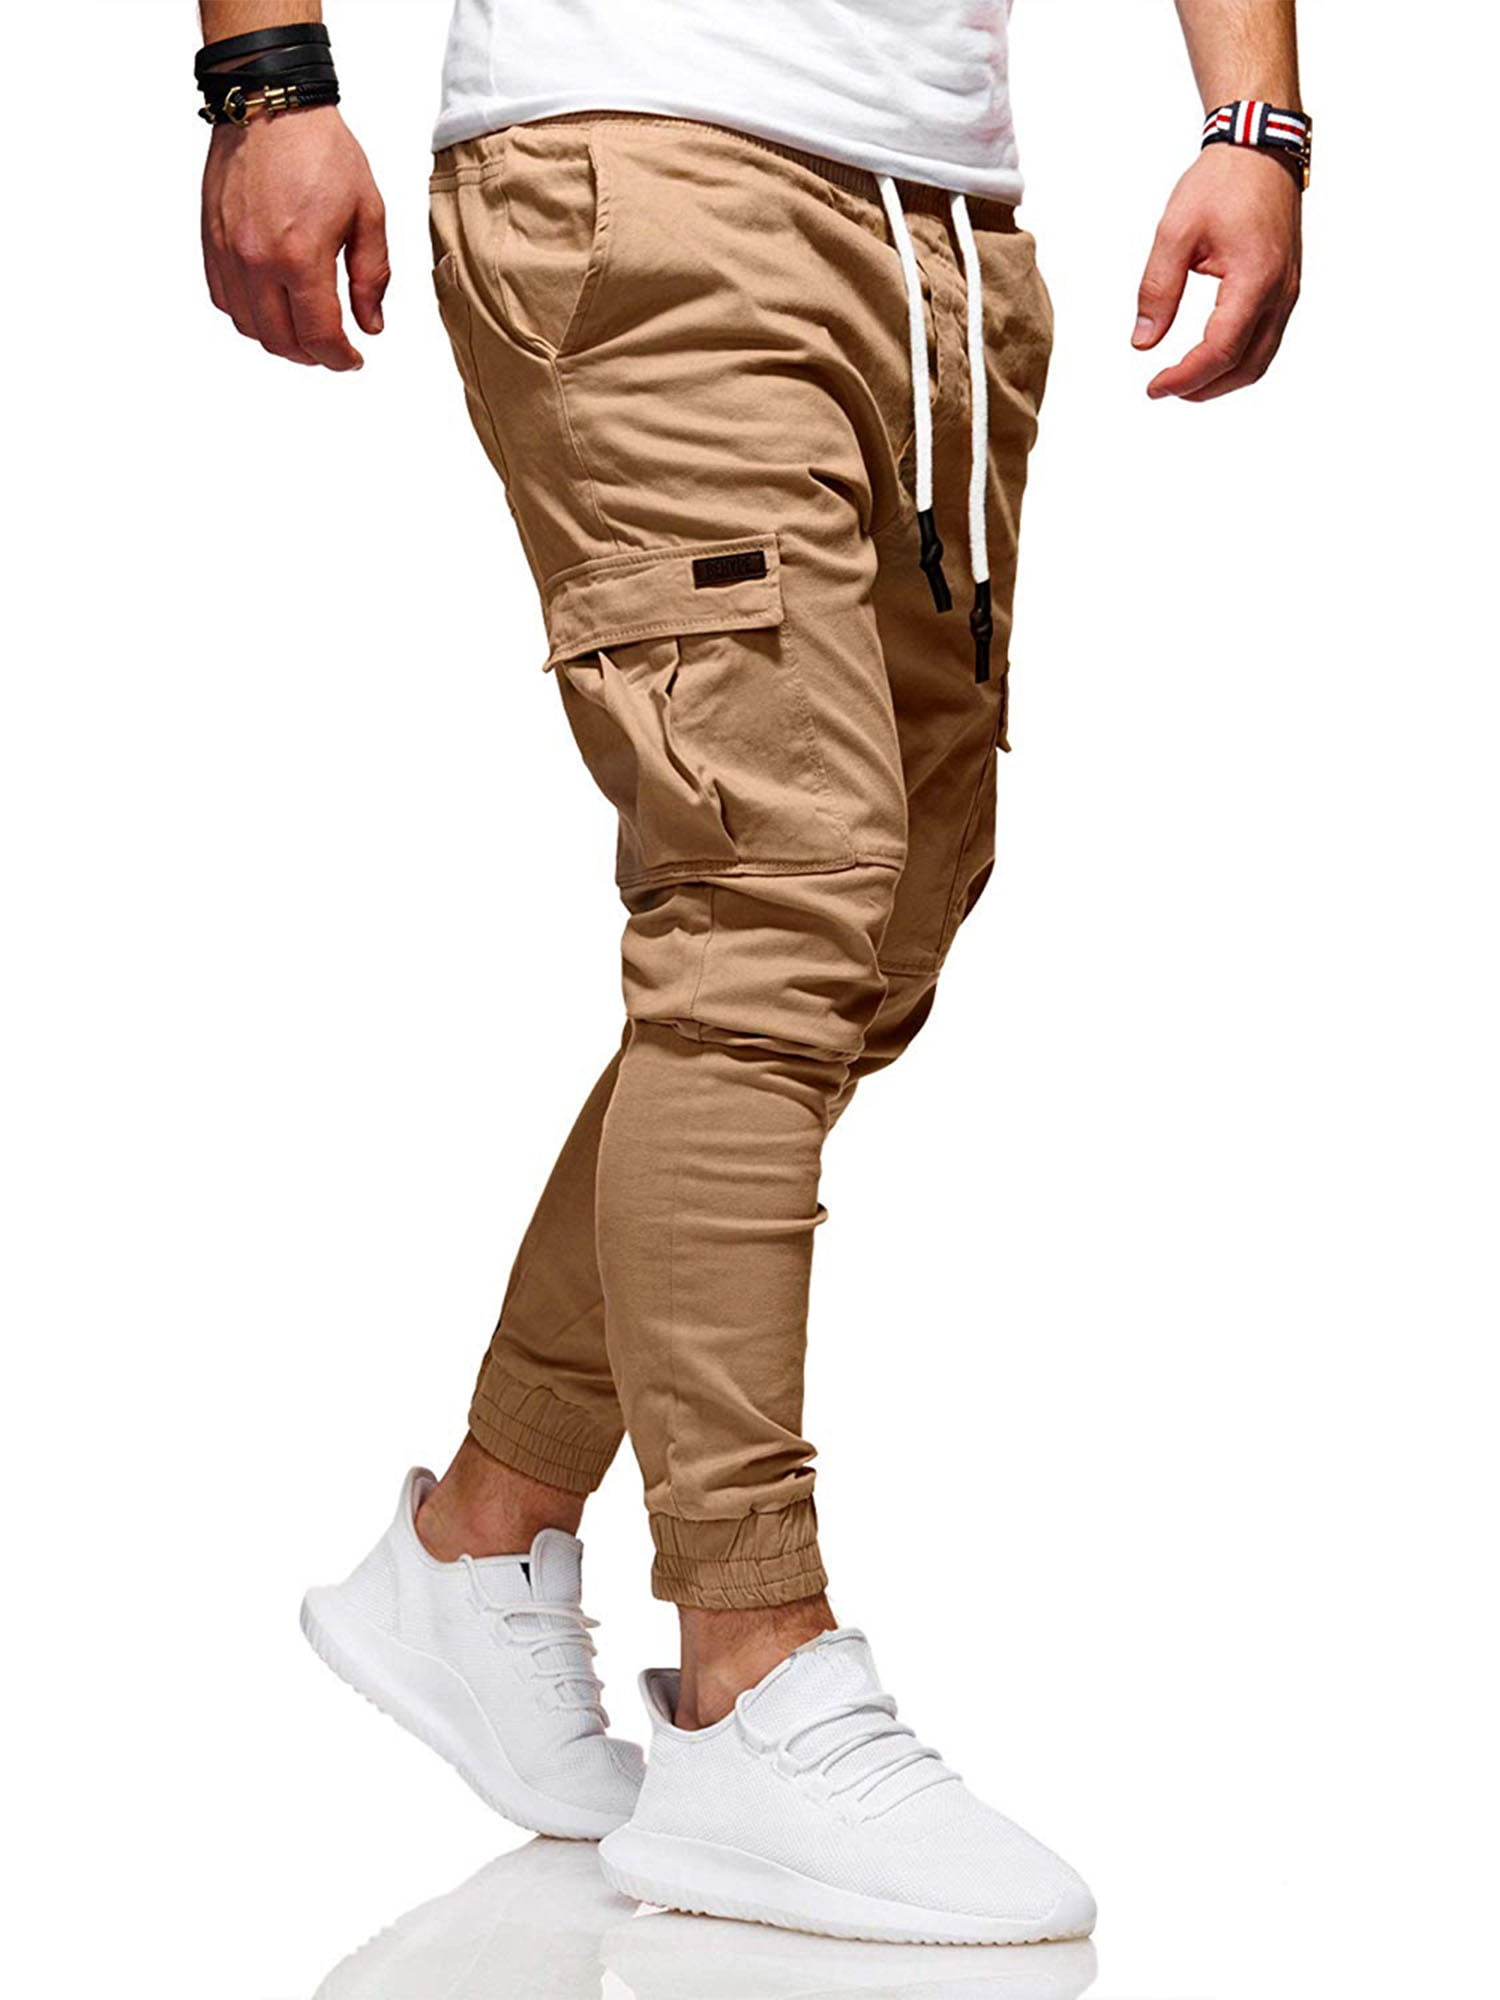 JSPOYOU Men's Outdoor Casual Loose Multi Pocket Cargo Pants Solid Military Athletic-Fit Trousers with Drawstring A 